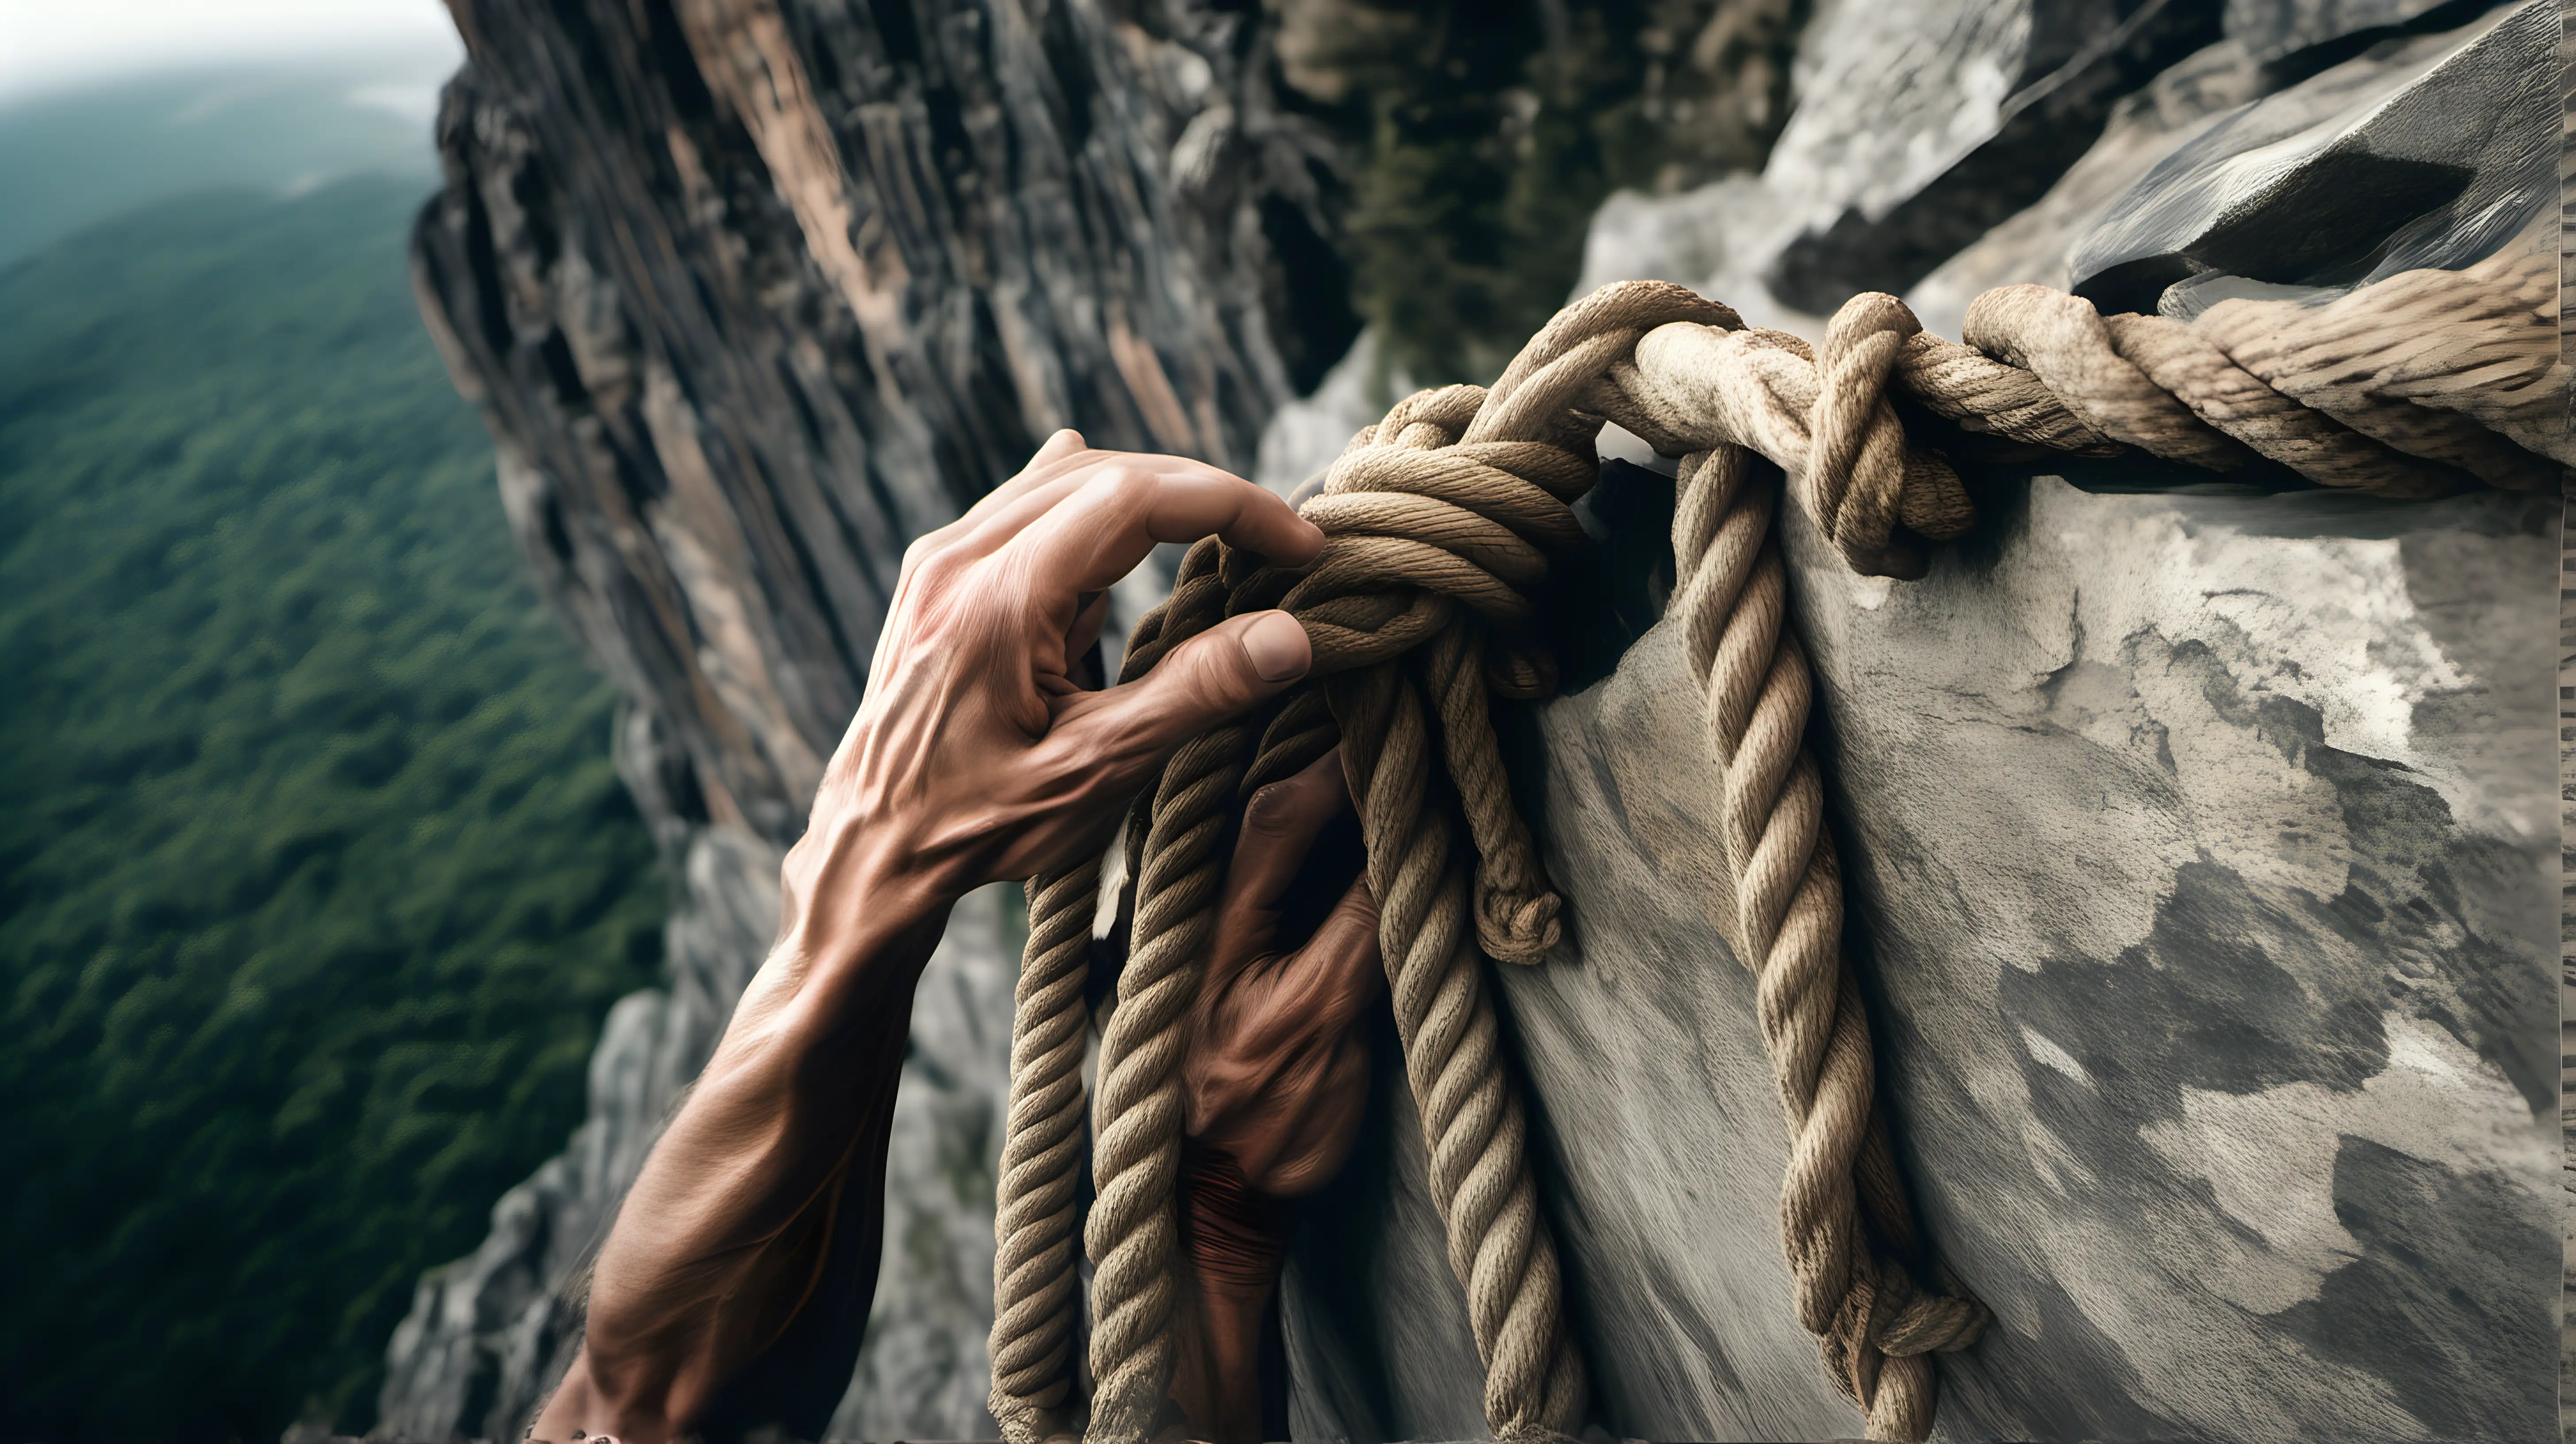 A pair of hands gripping onto a rope as a climber hauls themselves up a rocky cliff, their arms trembling with exertion, sweat dripping onto the earth below.